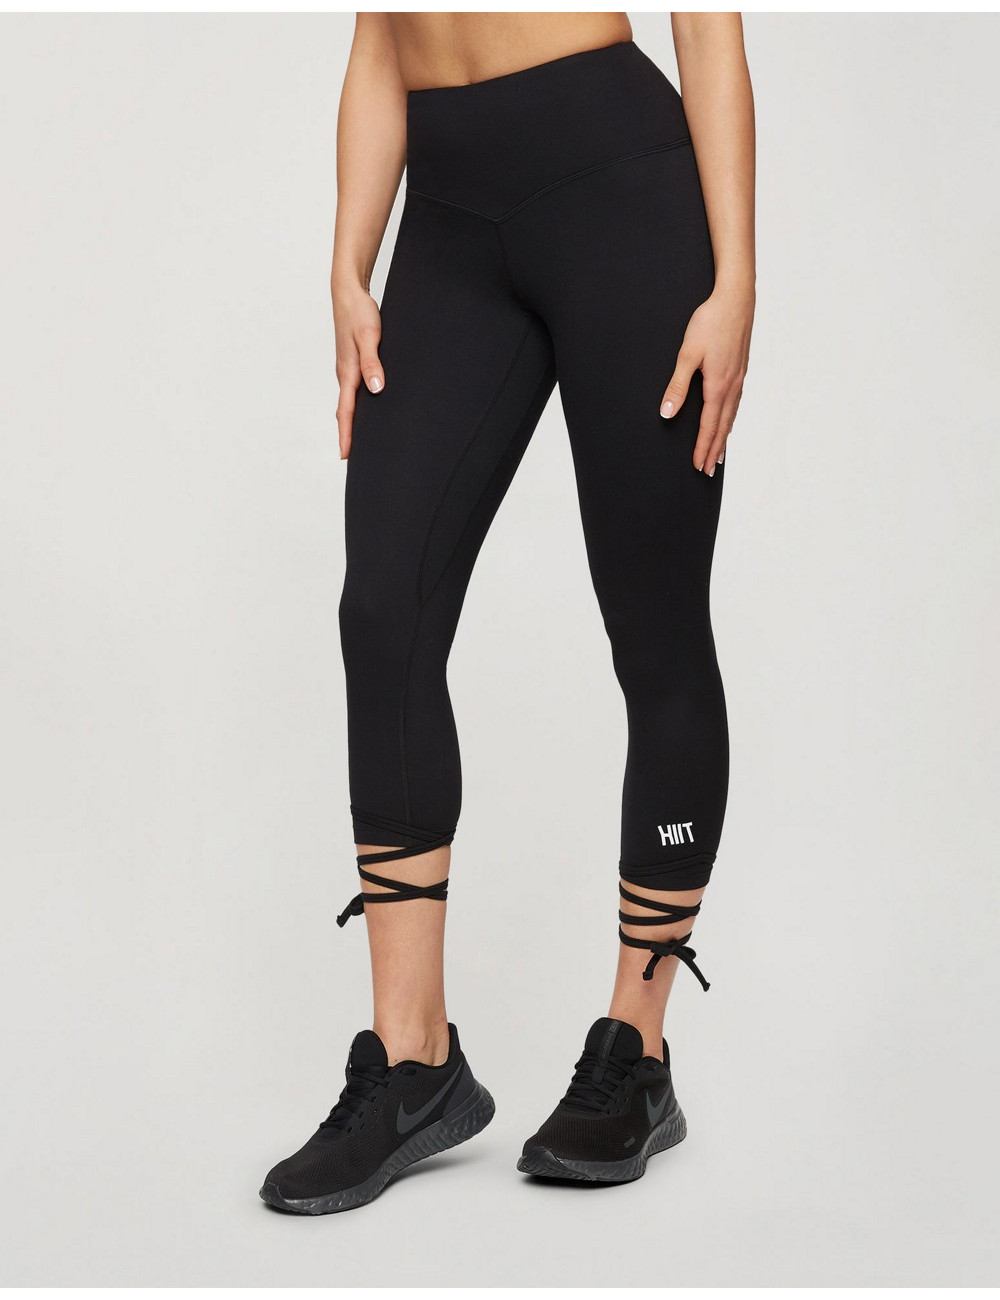 HIIT peached lace legging...